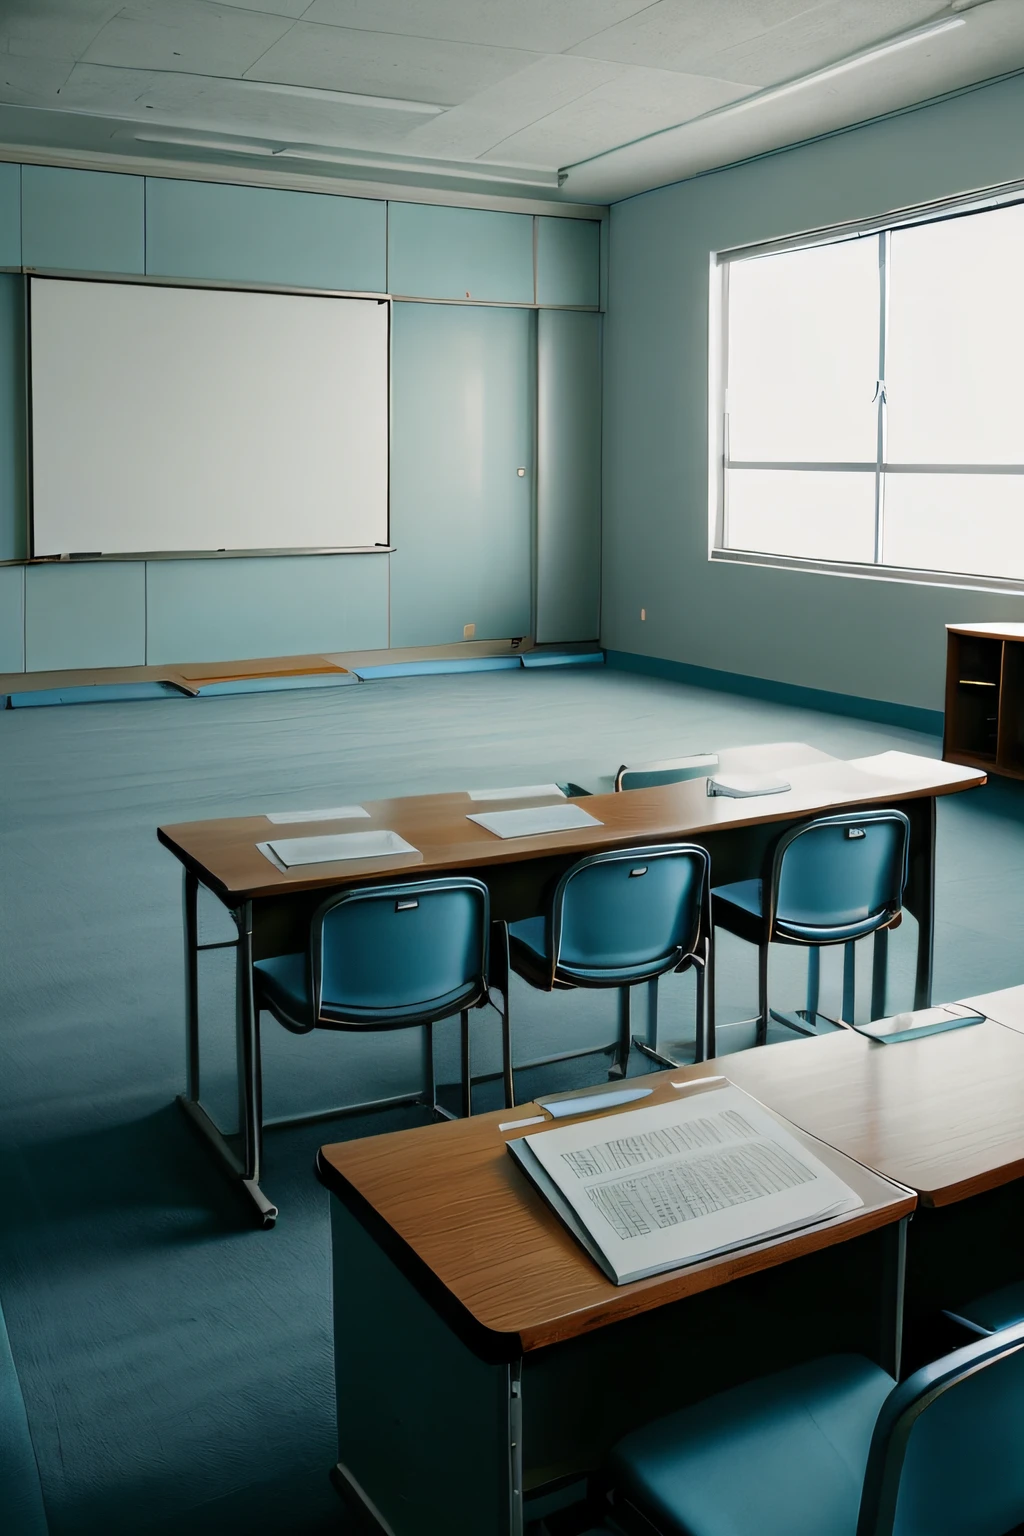 ‎Classroom，The podium is surreal，unnatural，A modest room，There is a screen cloth，pale blue tone